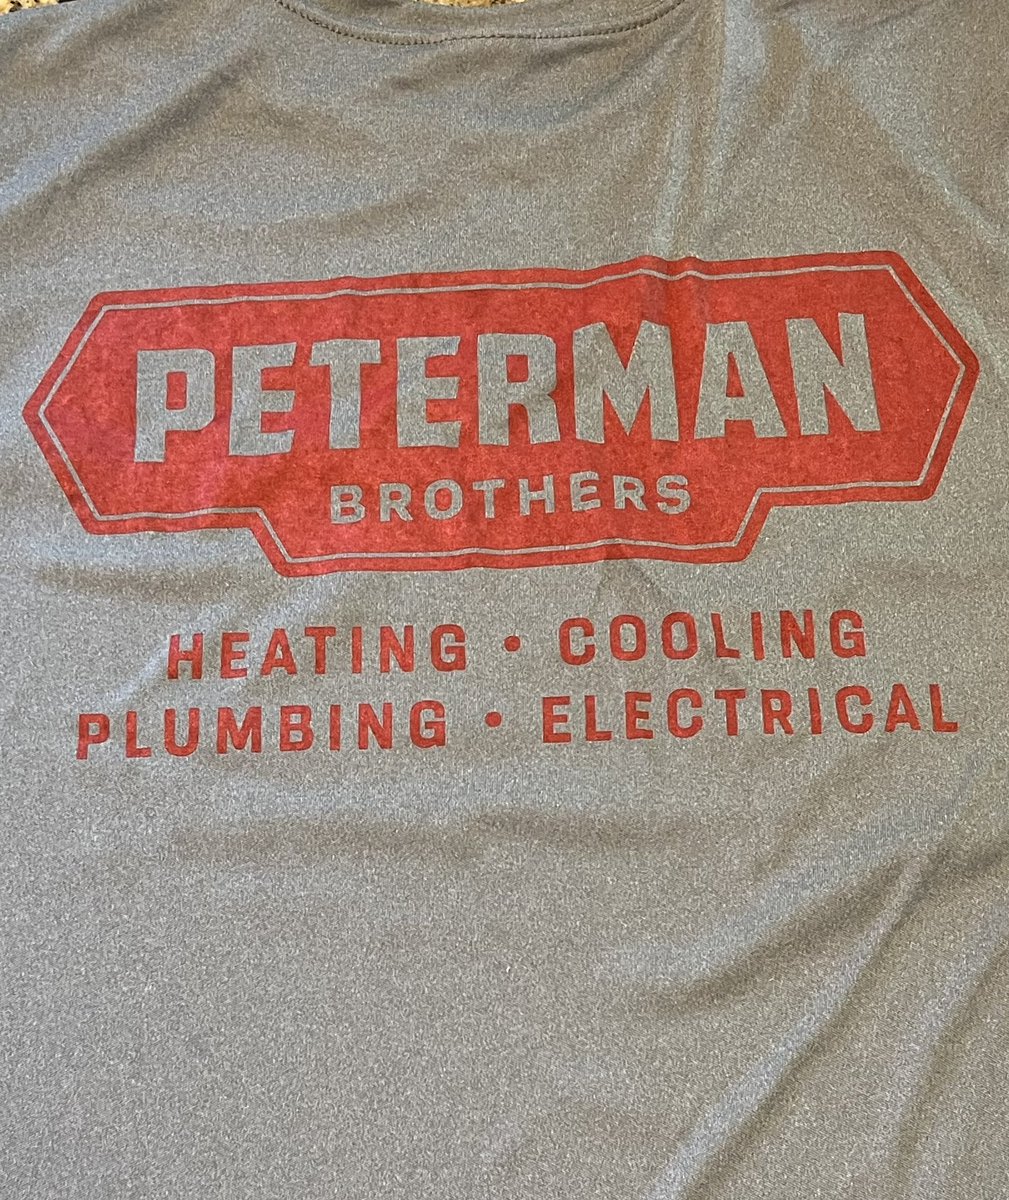 Shout out to @PetermanBros for sponsoring our camp shirts this year!! Dri fit gray looking sharp! #ChampionshipFriday #StrengthInNumbers